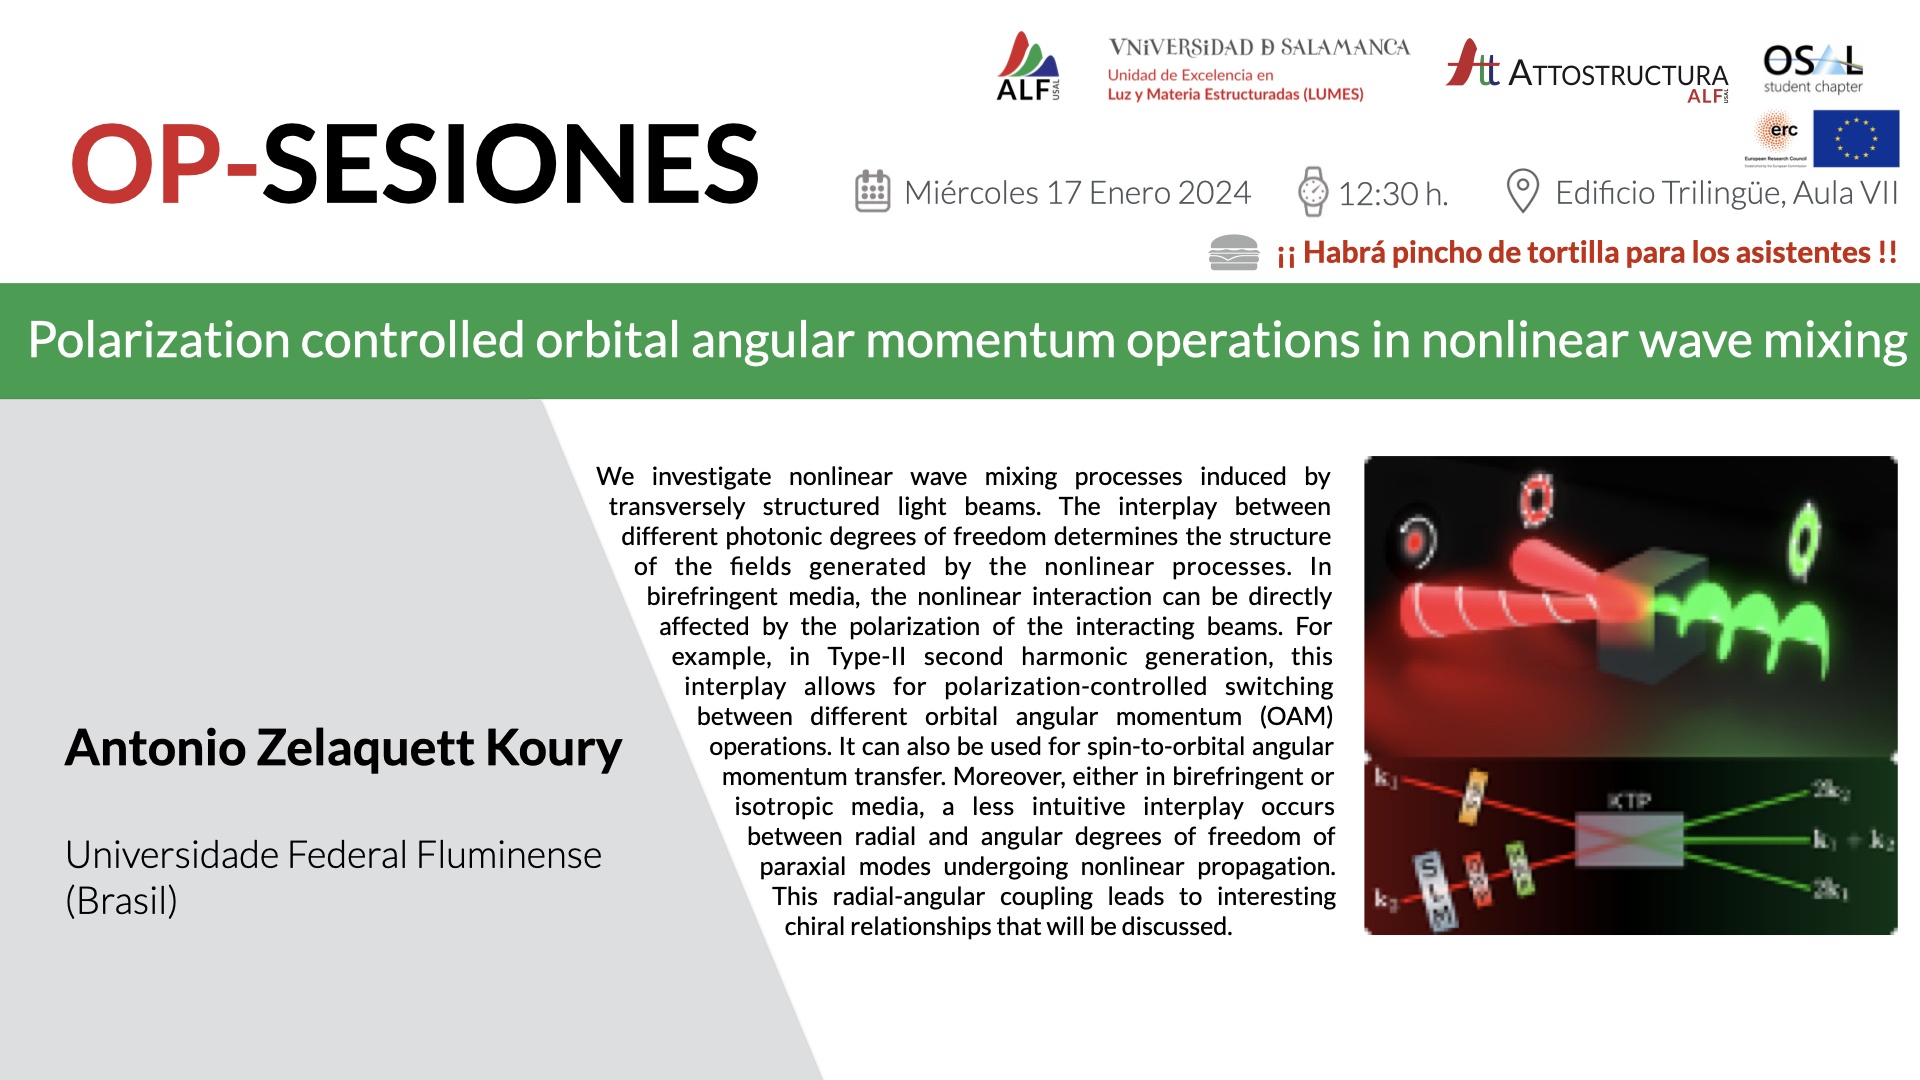 OP Session – Polarization controlled orbital angular momentum operations in nonlinear wave mixing